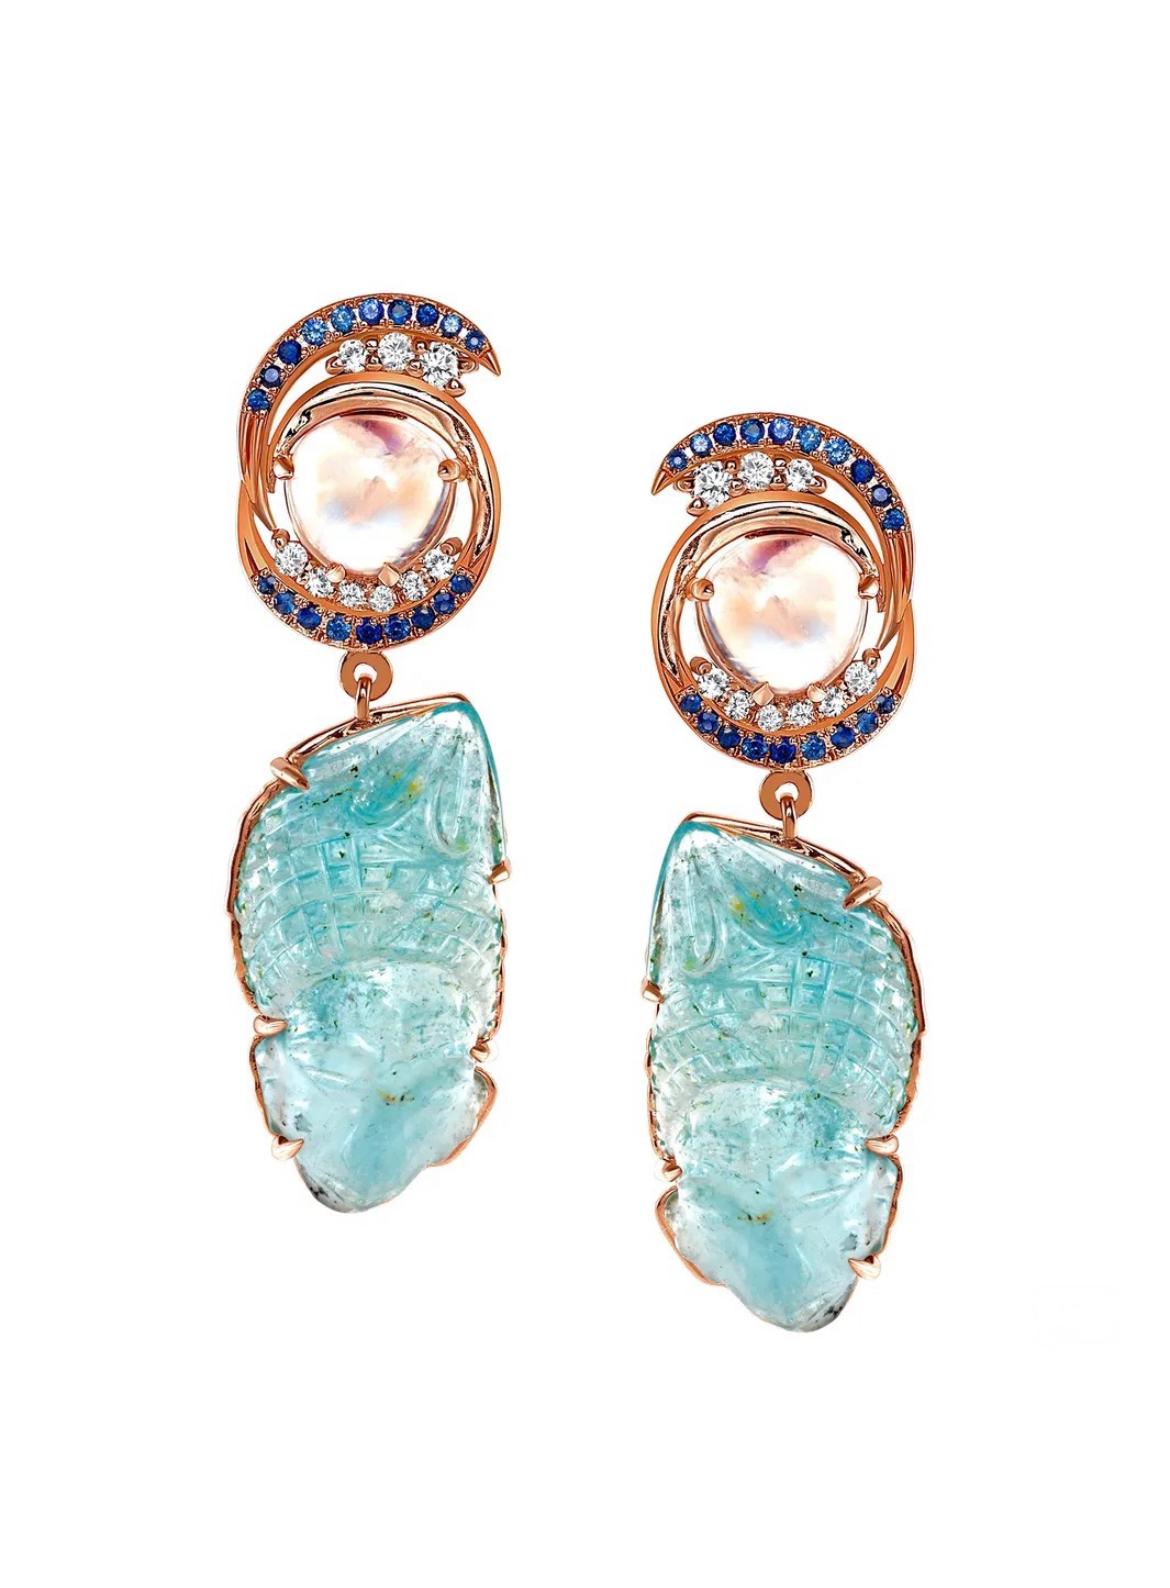 These awe-inspiring 18K rose gold earrings, dazzles with two 15.21 carats of carved Aquamarines and 6.48 carats of rainbow Moonstones. Scintillating halo of Ceylon sapphires totaling 0.76 carats and white diamonds totaling 0.54 carats adds style and